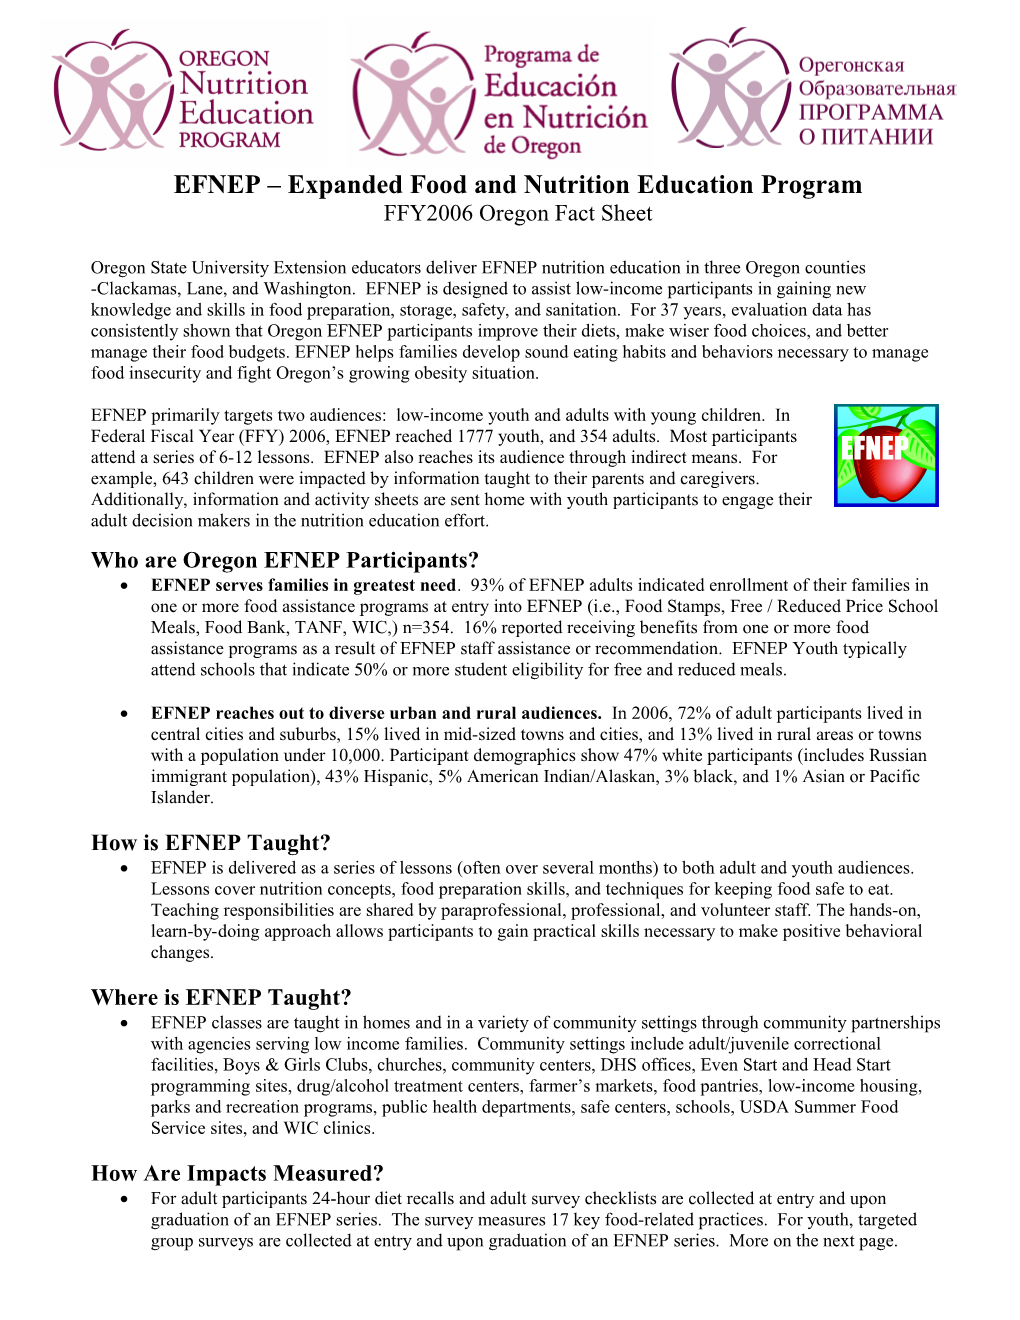 EFNEP Expanded Food and Nutrition Education Program